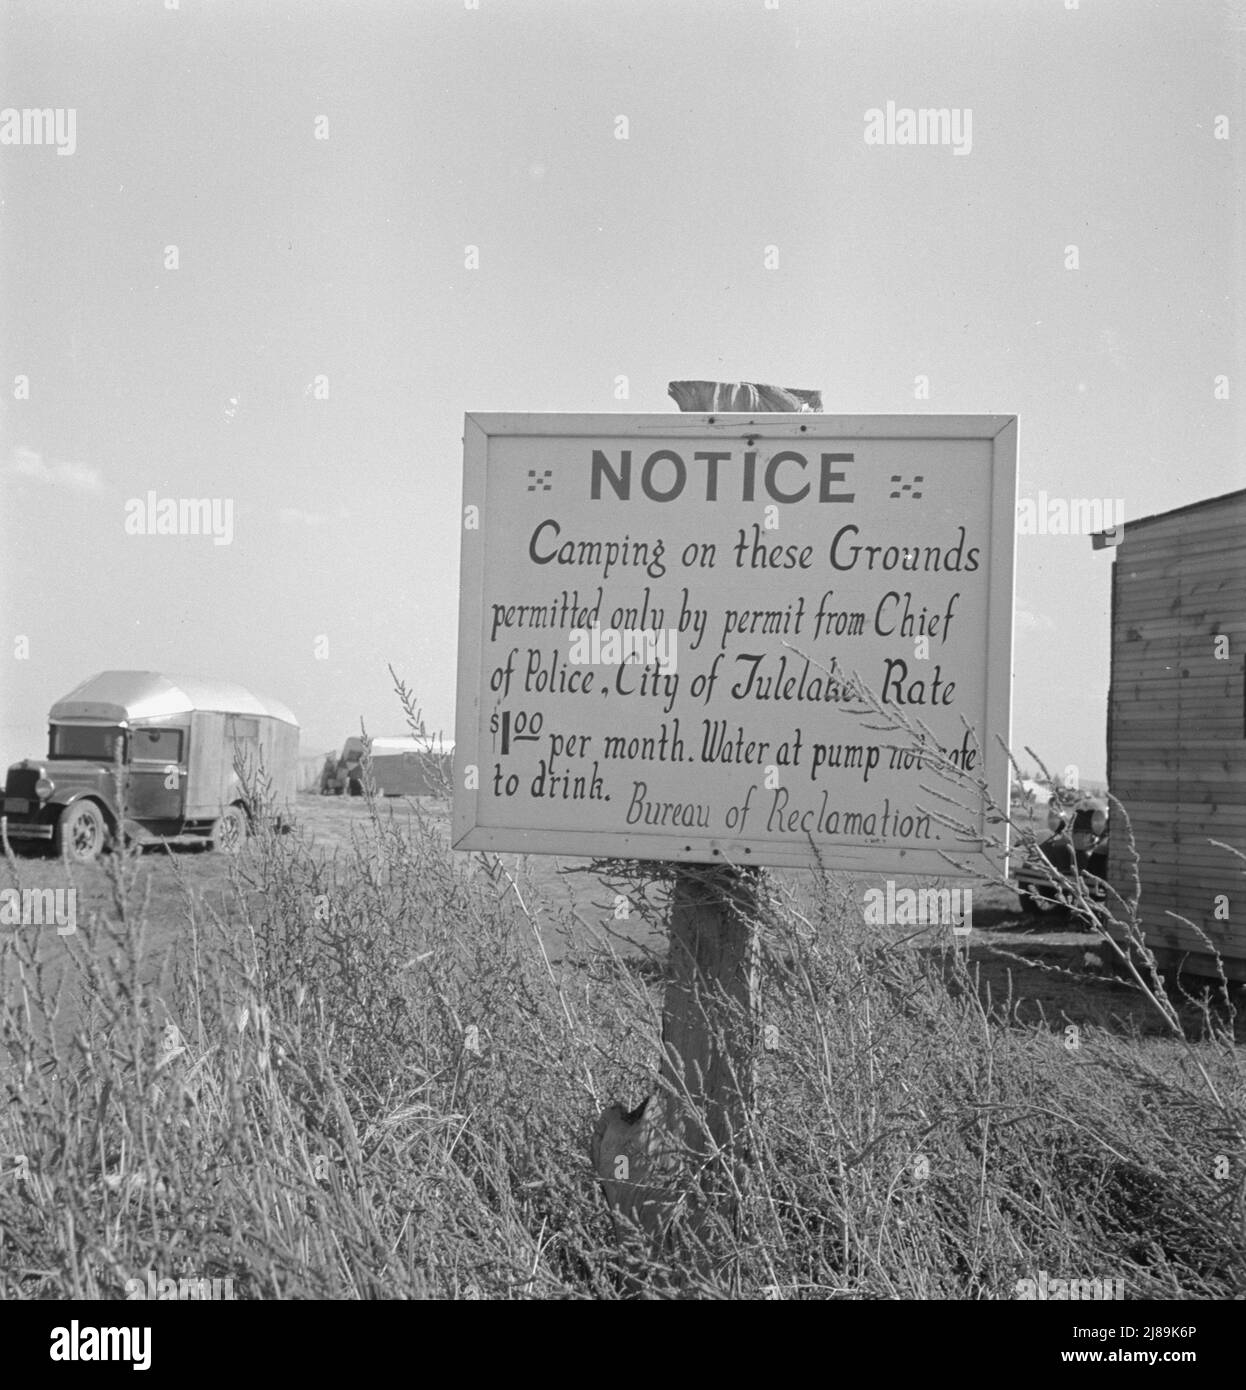 Sign on camp site opposite potato packing sheds. Tulelake, Siskiyou County, California. ['Notice - Camping on these Grounds permitted only by permit from Chief of Police. City of Tulelake. Rate $1.00 per month. Water at pump not safe to drink. Bureau of Reclamation']. Stock Photo